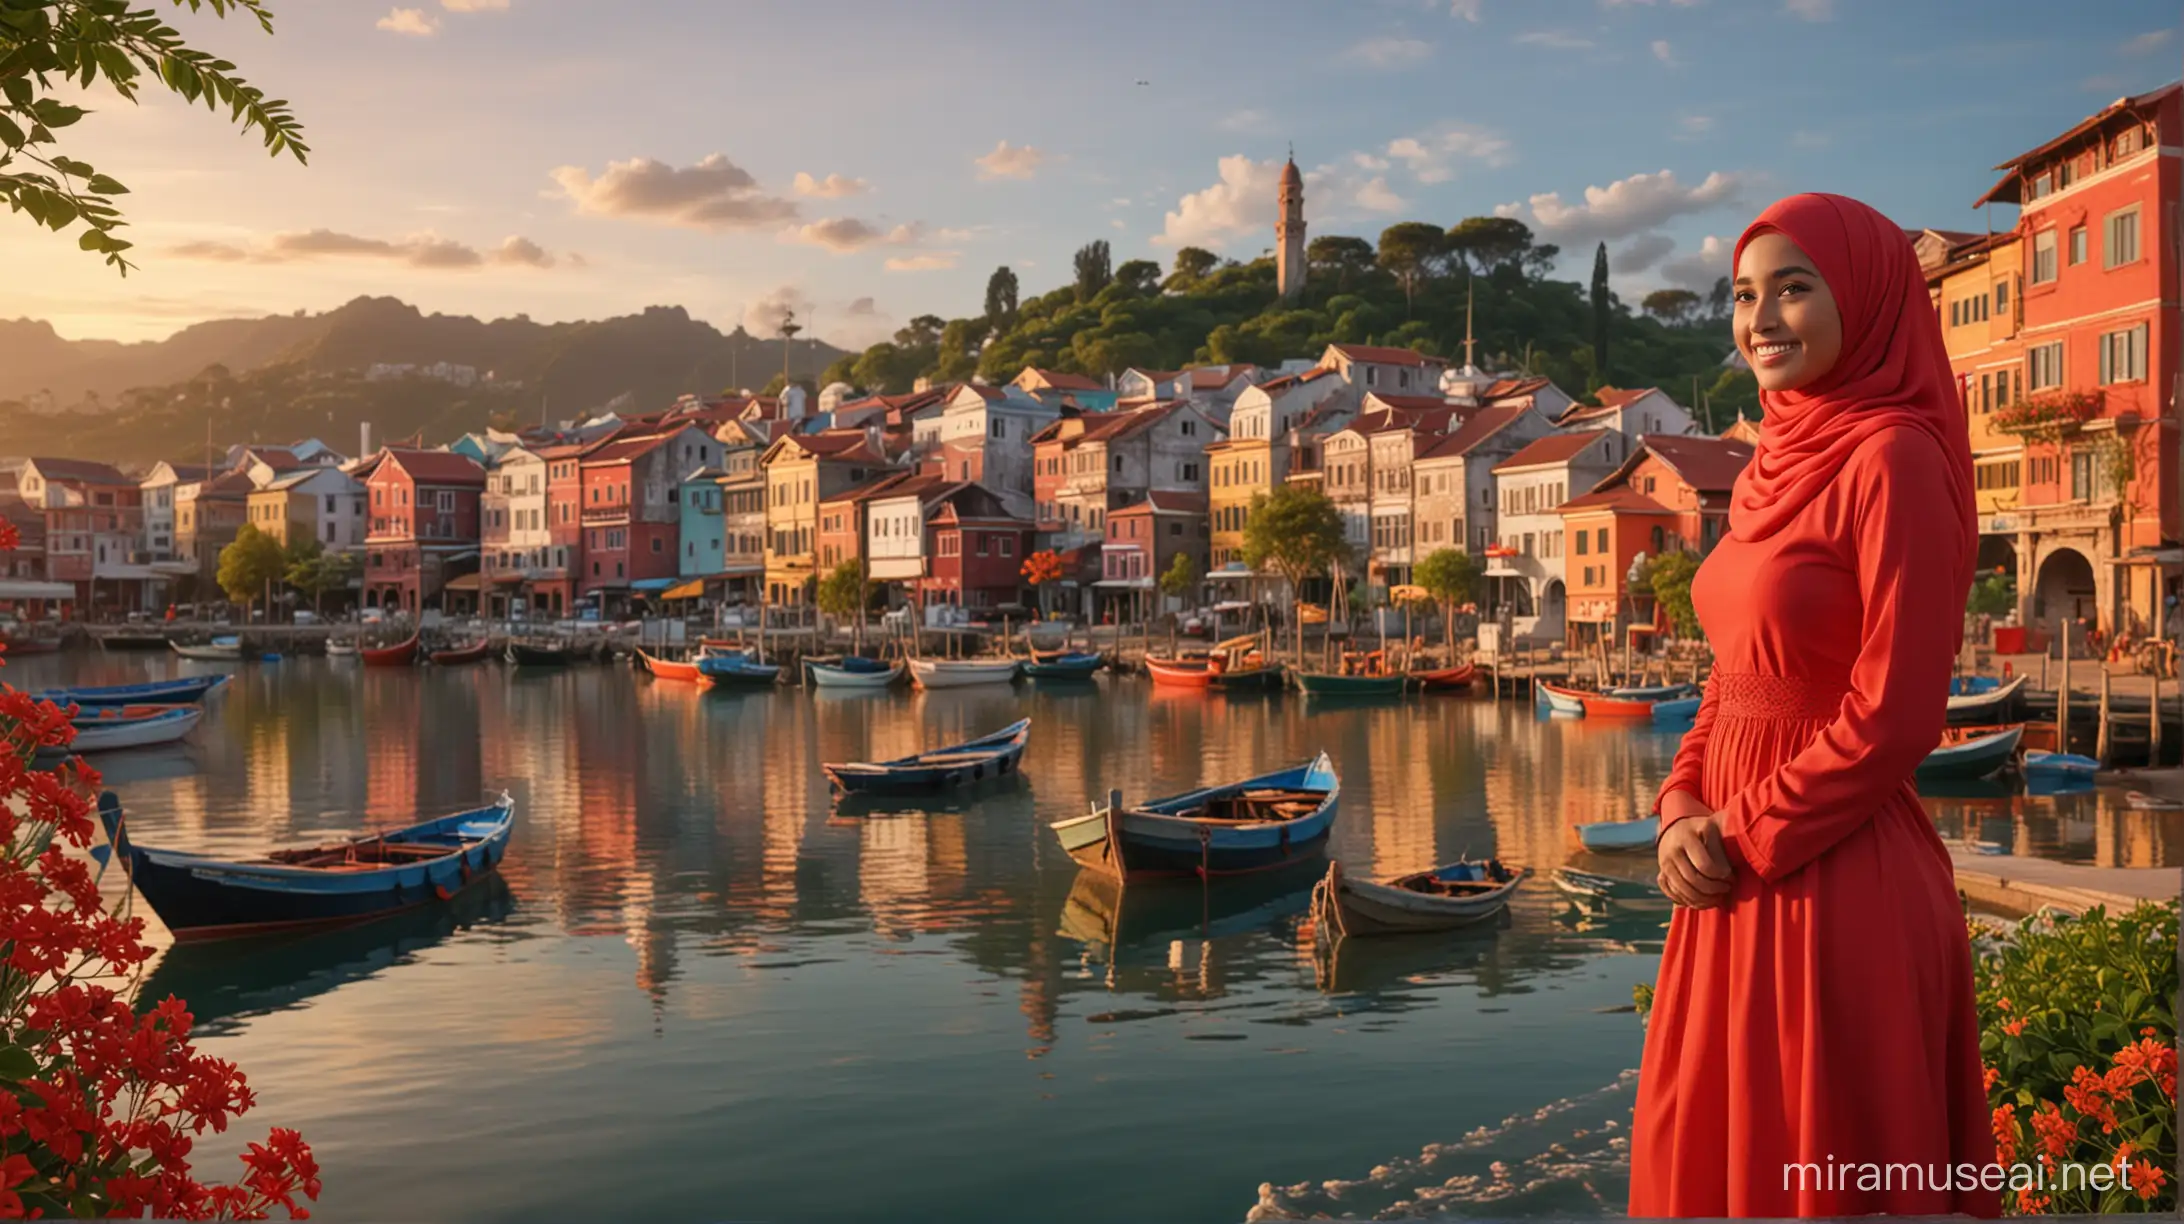 3d,A serene and picturesque coastal scene during sunset, with a beautiful malay  woman with hijab,smiling face , in a red dress admiring the view; boats are moored nearby, and charming buildings with flowering plants adorn the background,vivid colour 